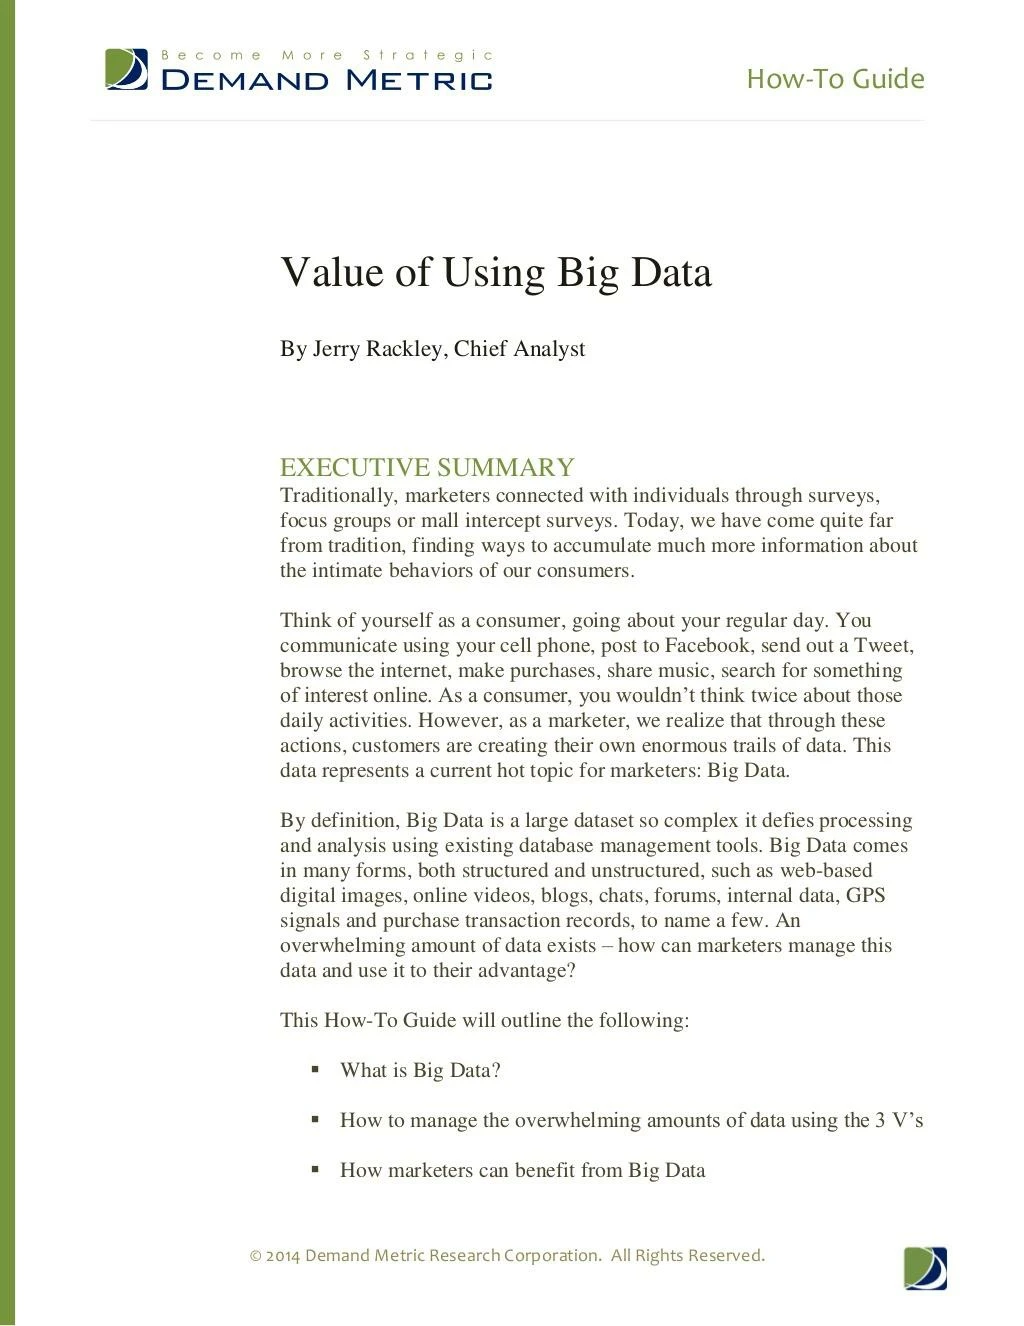 value of using big data how to guide